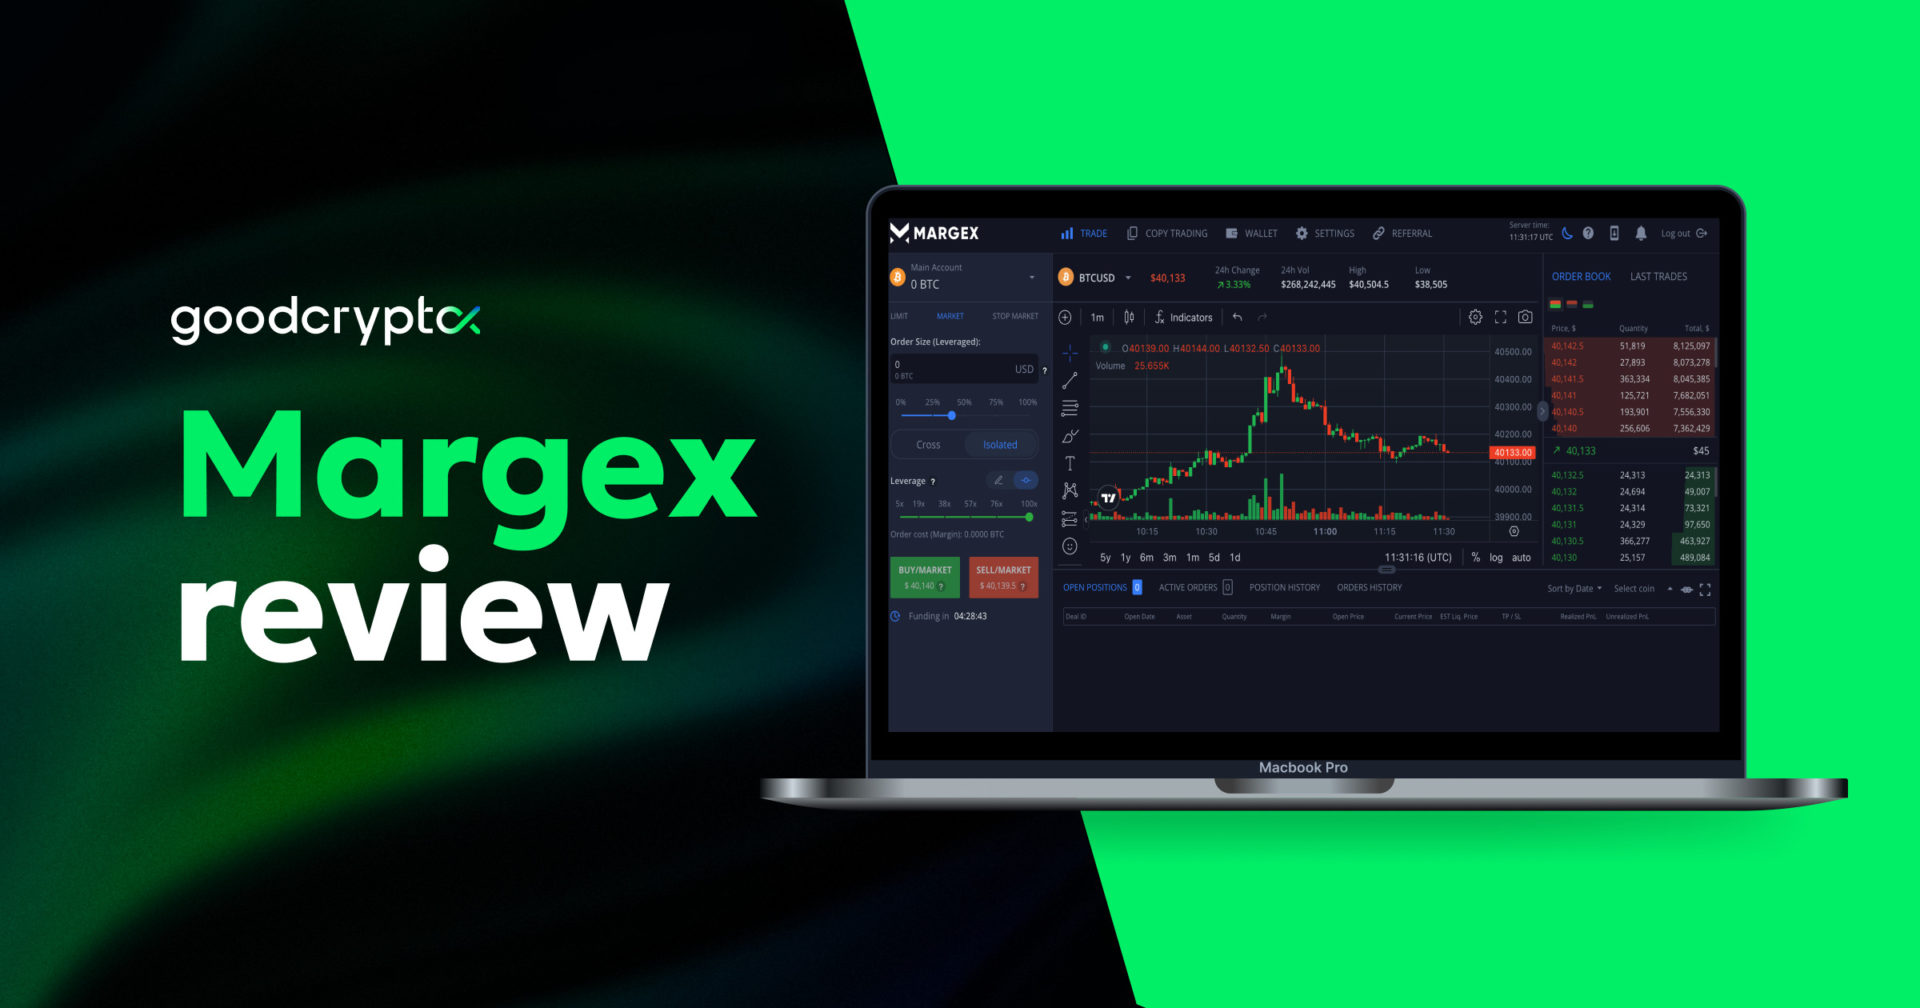 Margex exchange review